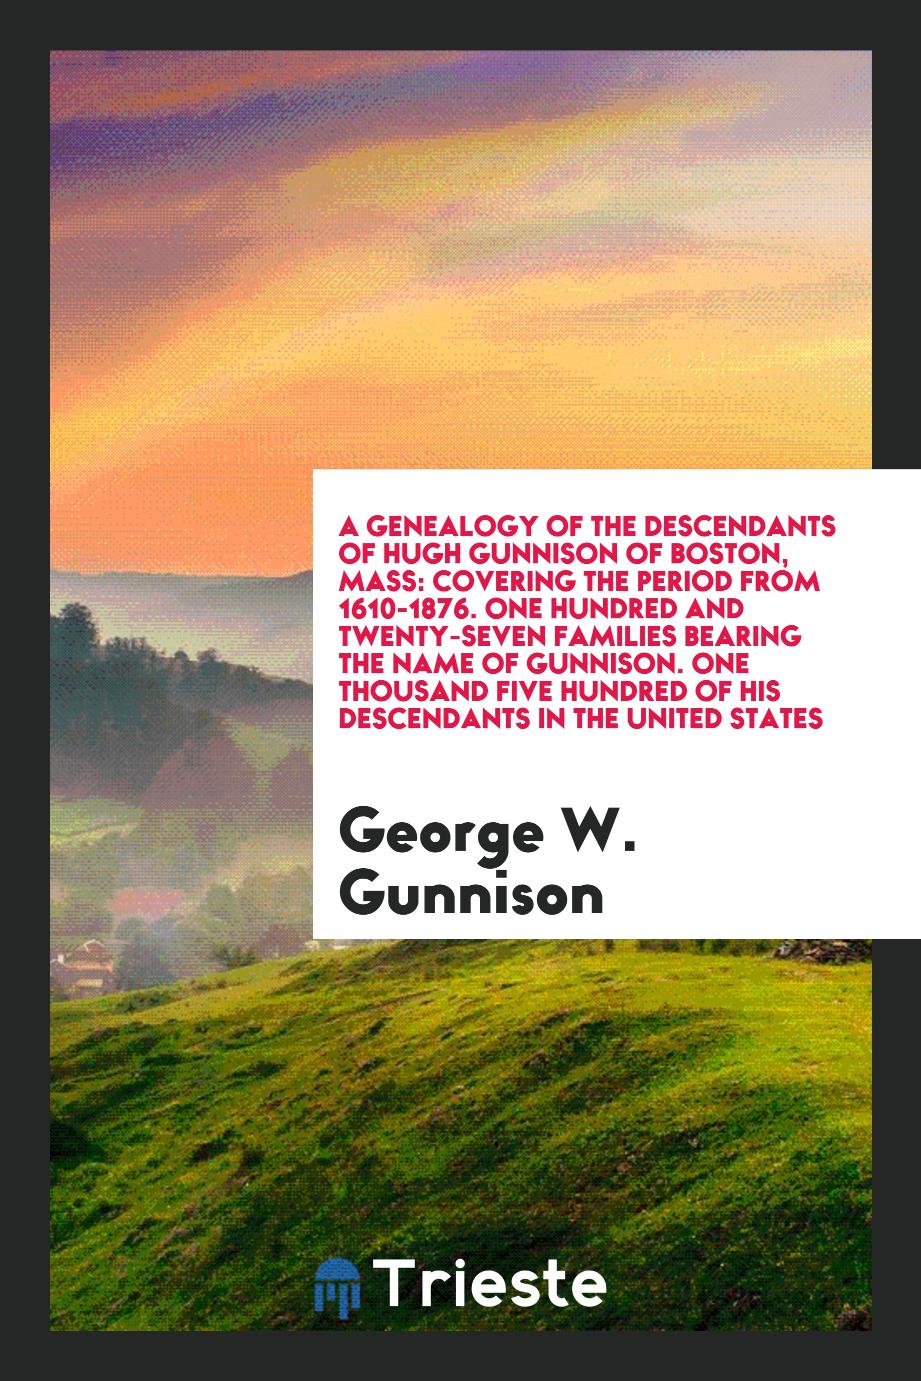 A Genealogy of the Descendants of Hugh Gunnison of Boston, Mass: Covering the Period from 1610-1876. One Hundred and Twenty-Seven Families Bearing the Name of Gunnison. One Thousand Five Hundred of His Descendants in the United States